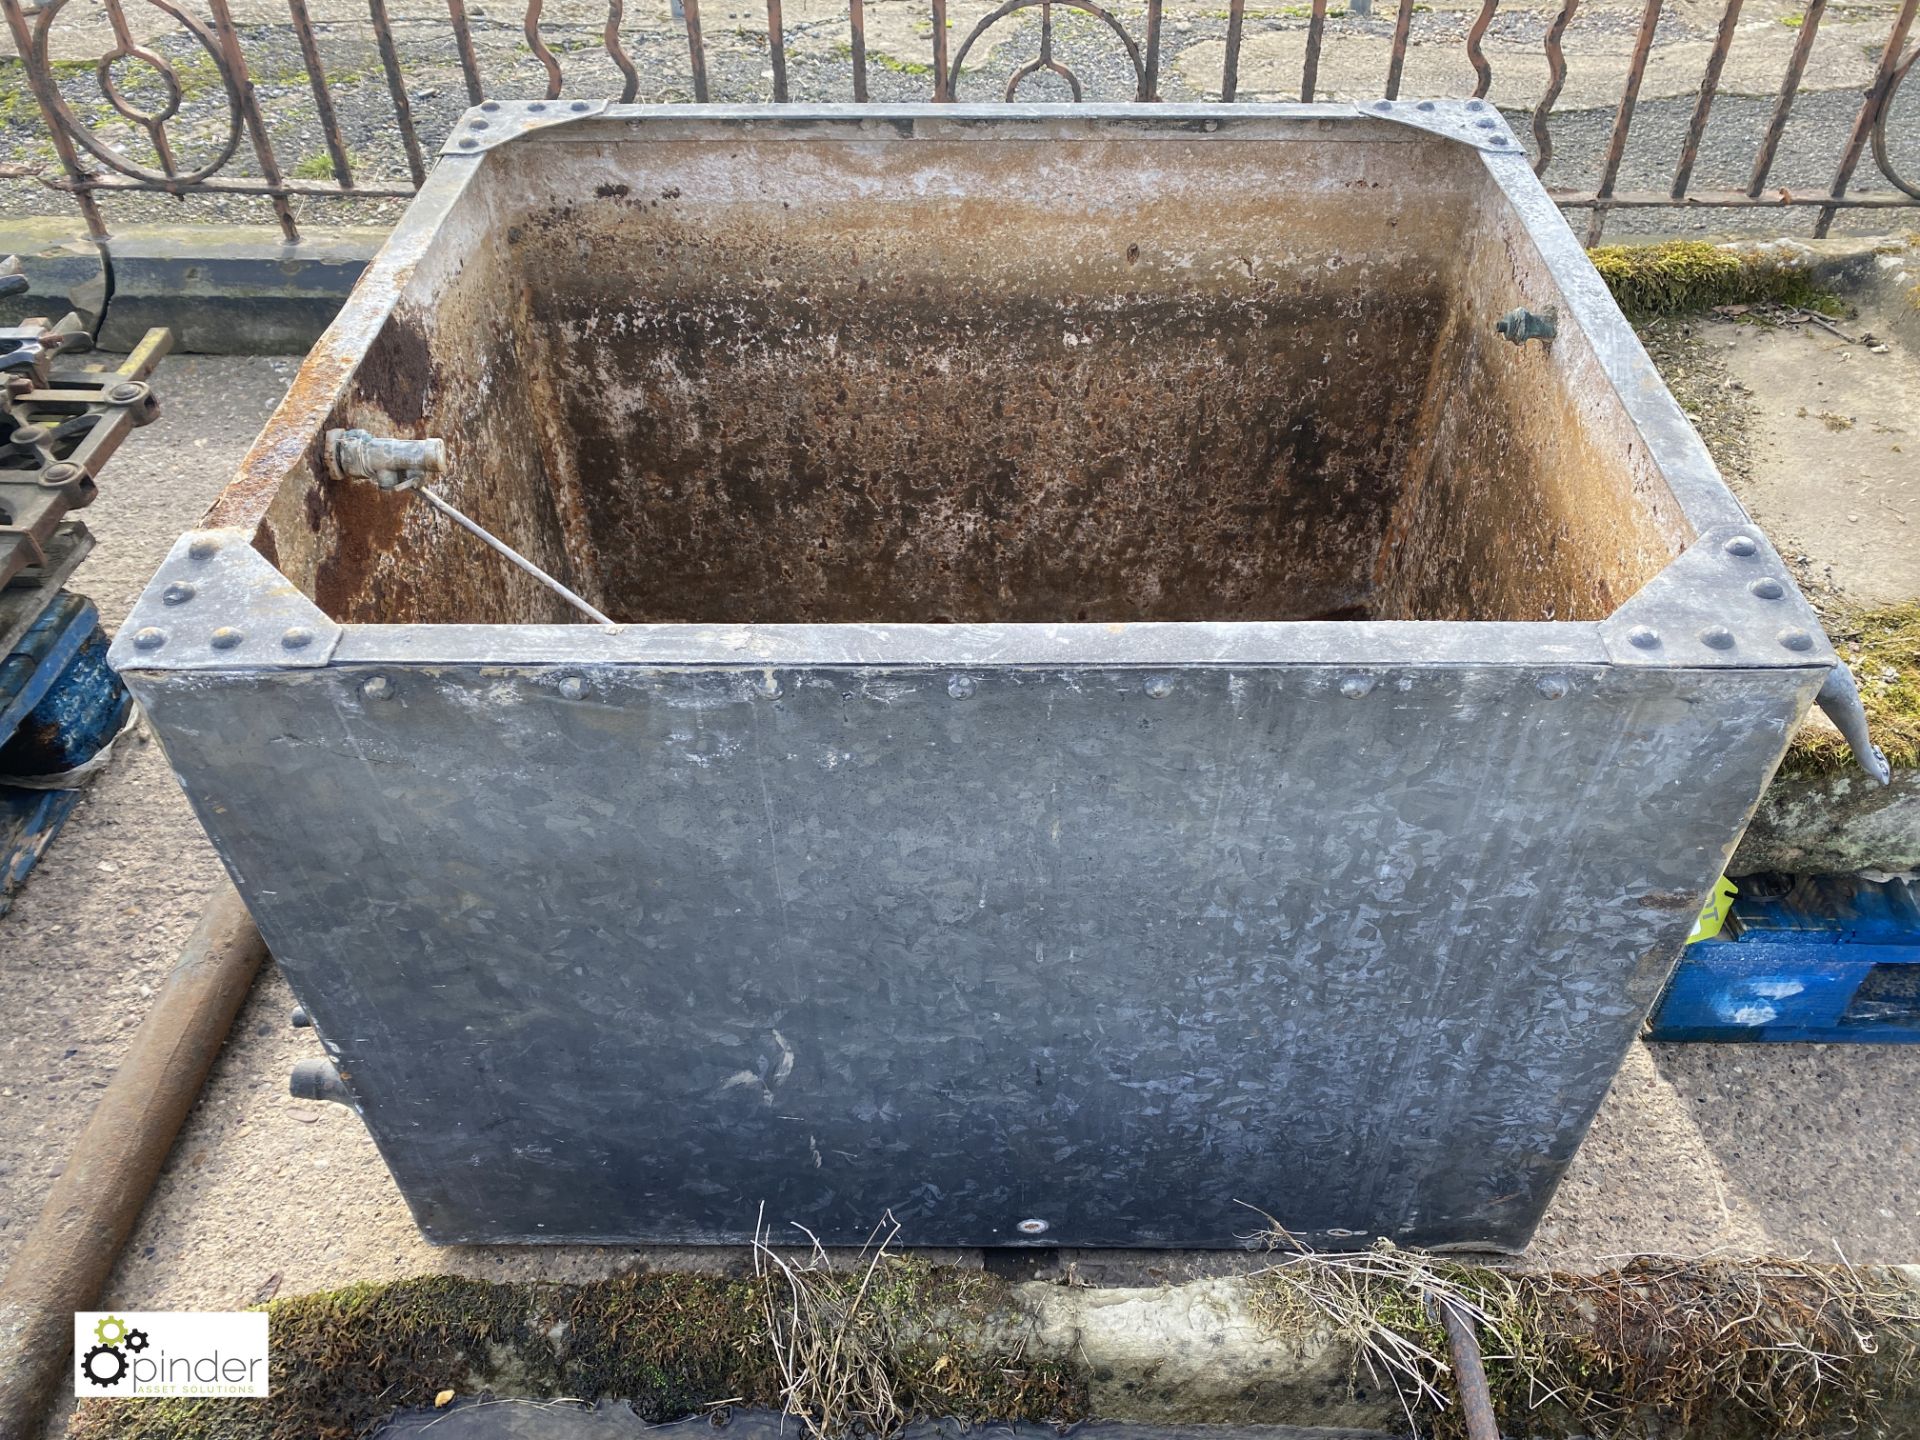 A Victorian metal riveted galvanised Water Cistern, 26in high x 30in x 36in long